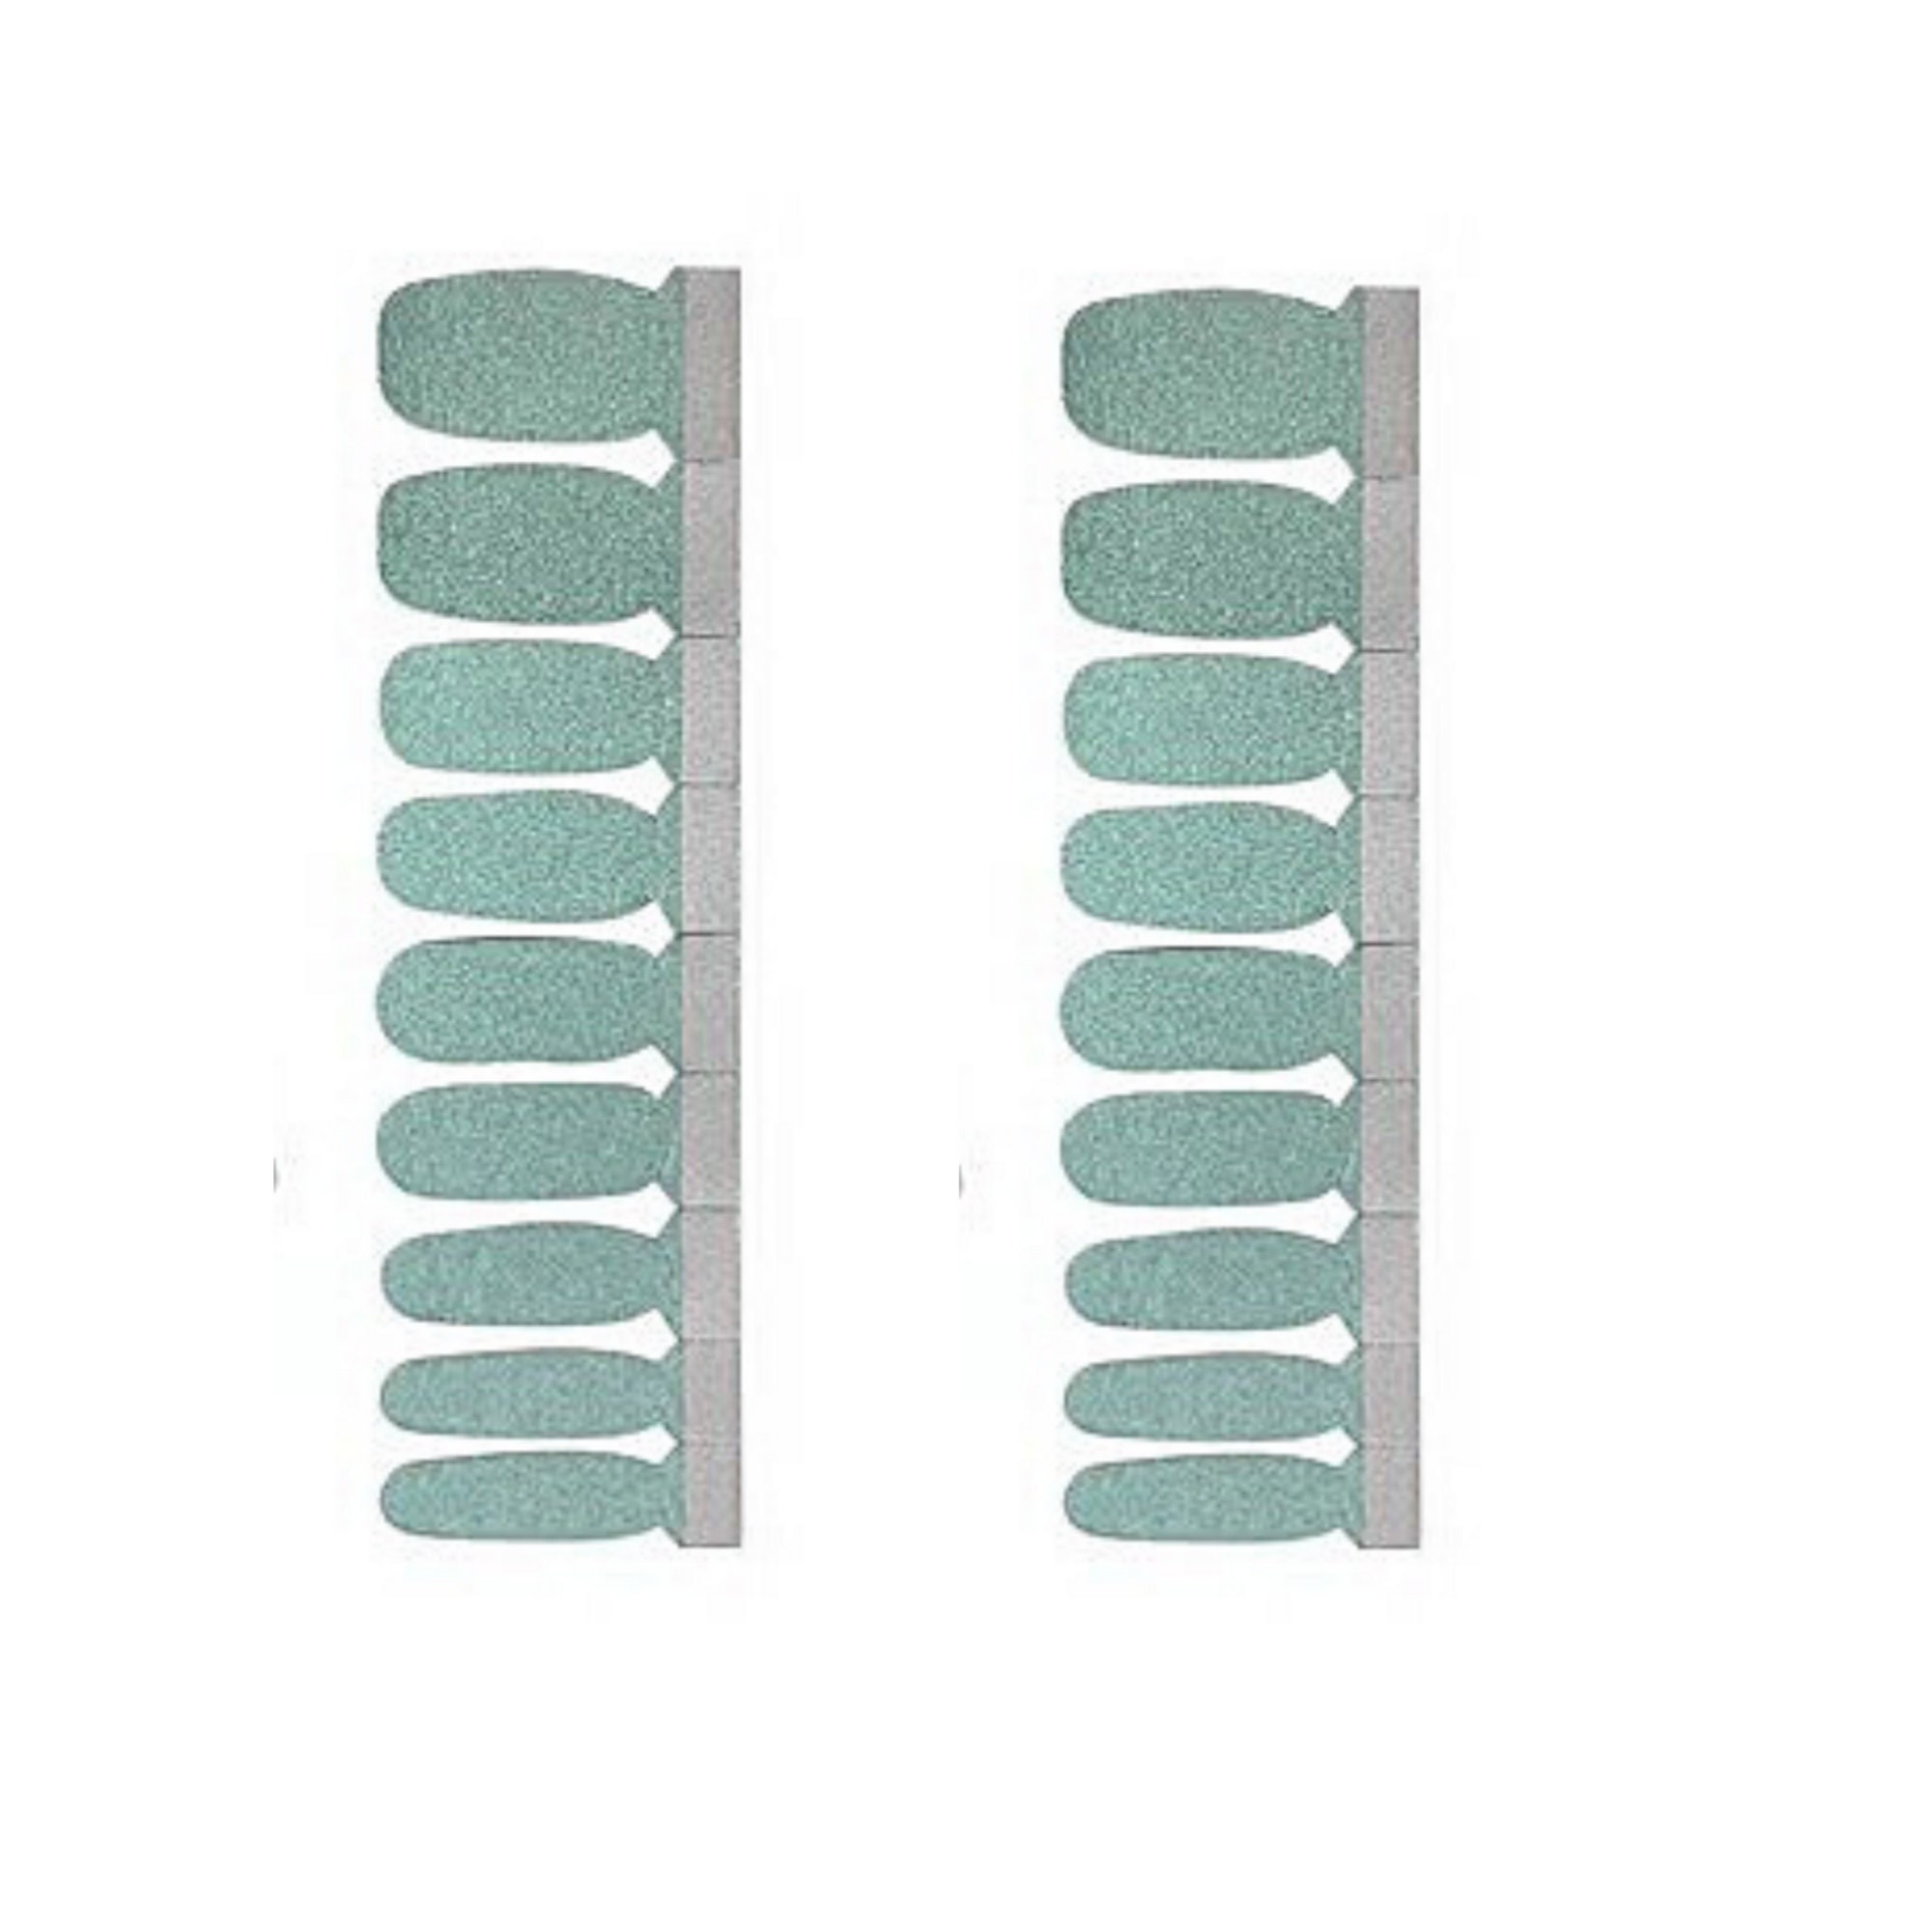 Mint green duo chrome color solid real nail polish strips M1 | Etsy